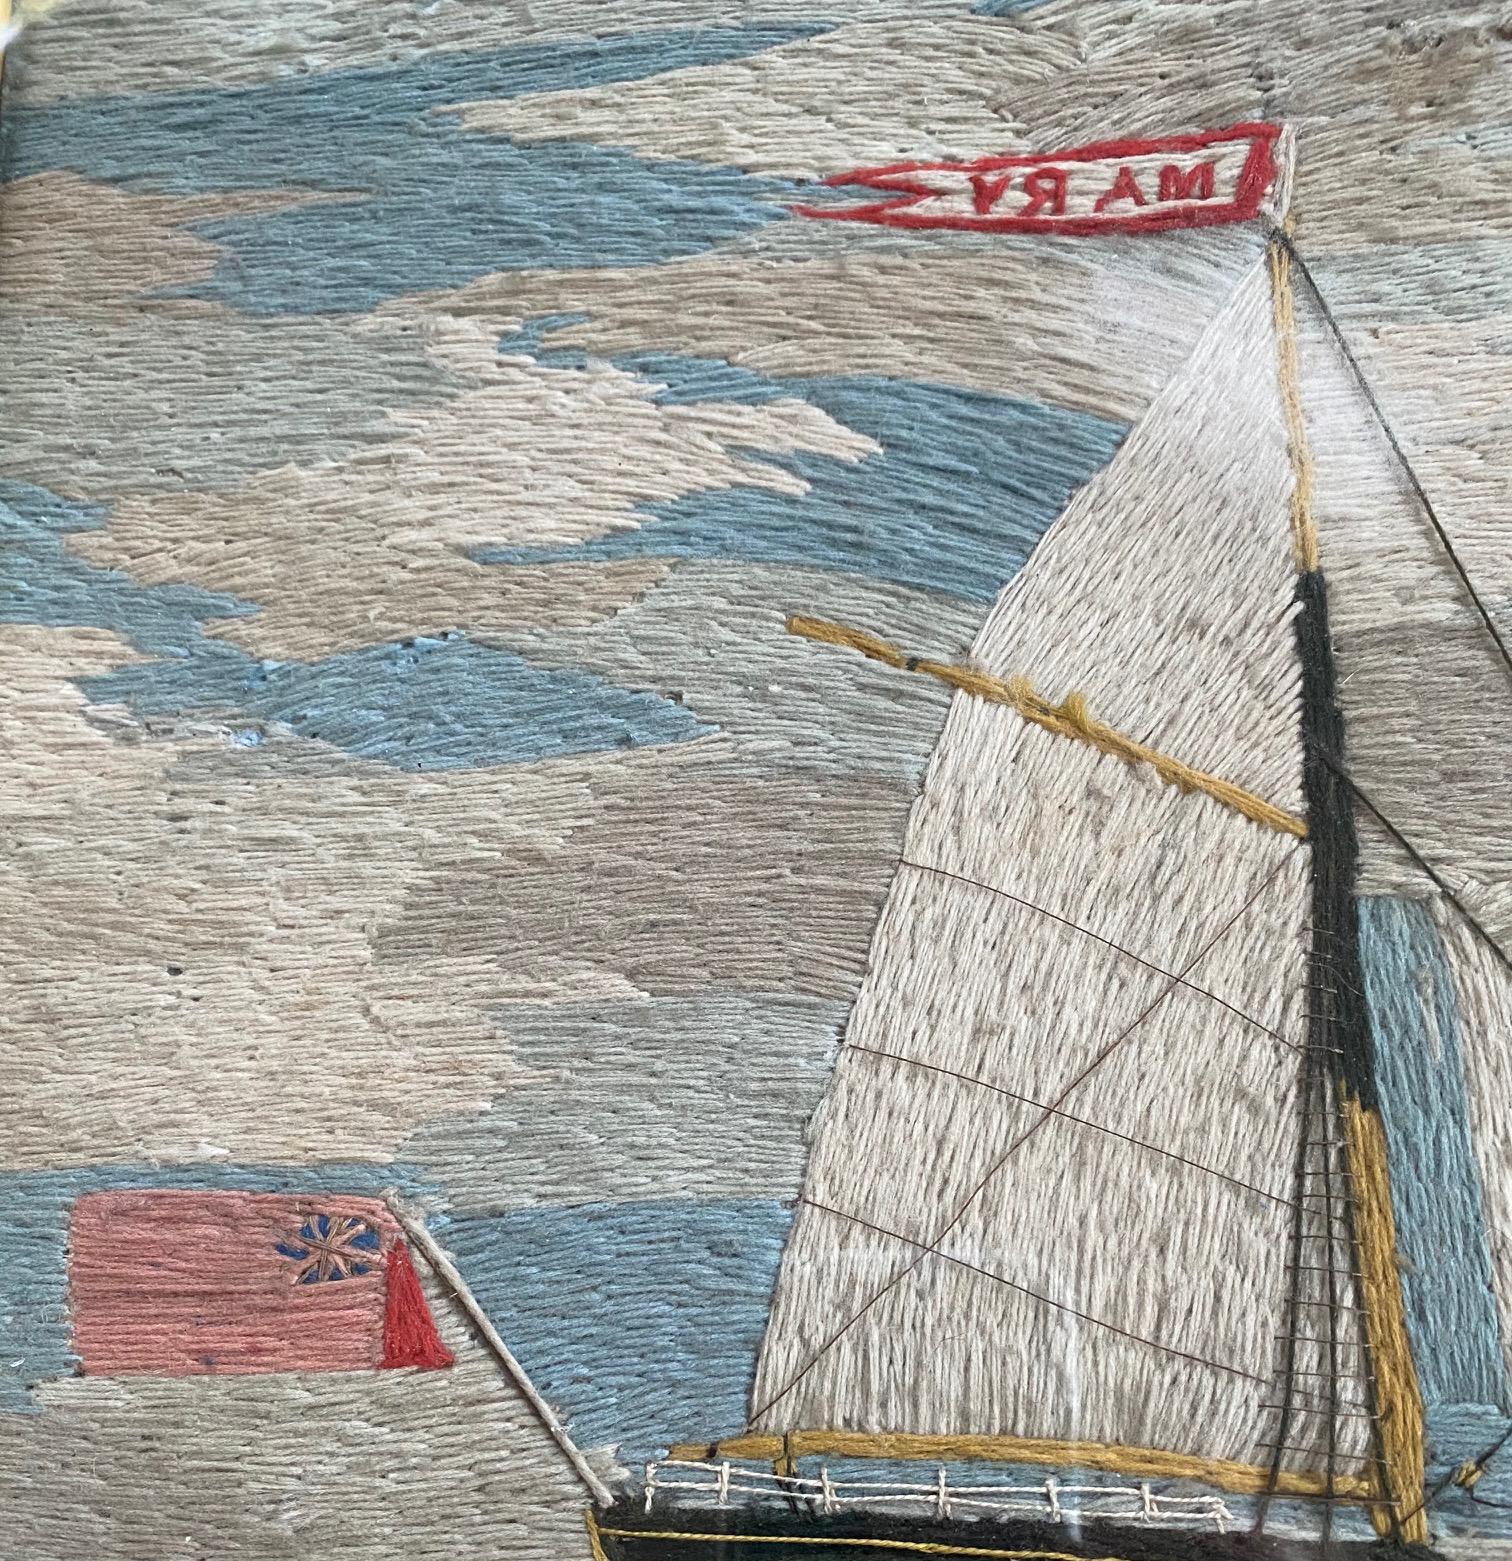 19th century sailor's Woolie of a British Auxiliary Schooner, circa 1850s. A sailor's woolwork image of a fully rigged two masted schooner with auxiliary smokestack amidship, on a port tack approaching a headland. The schooner has the MARY prominent